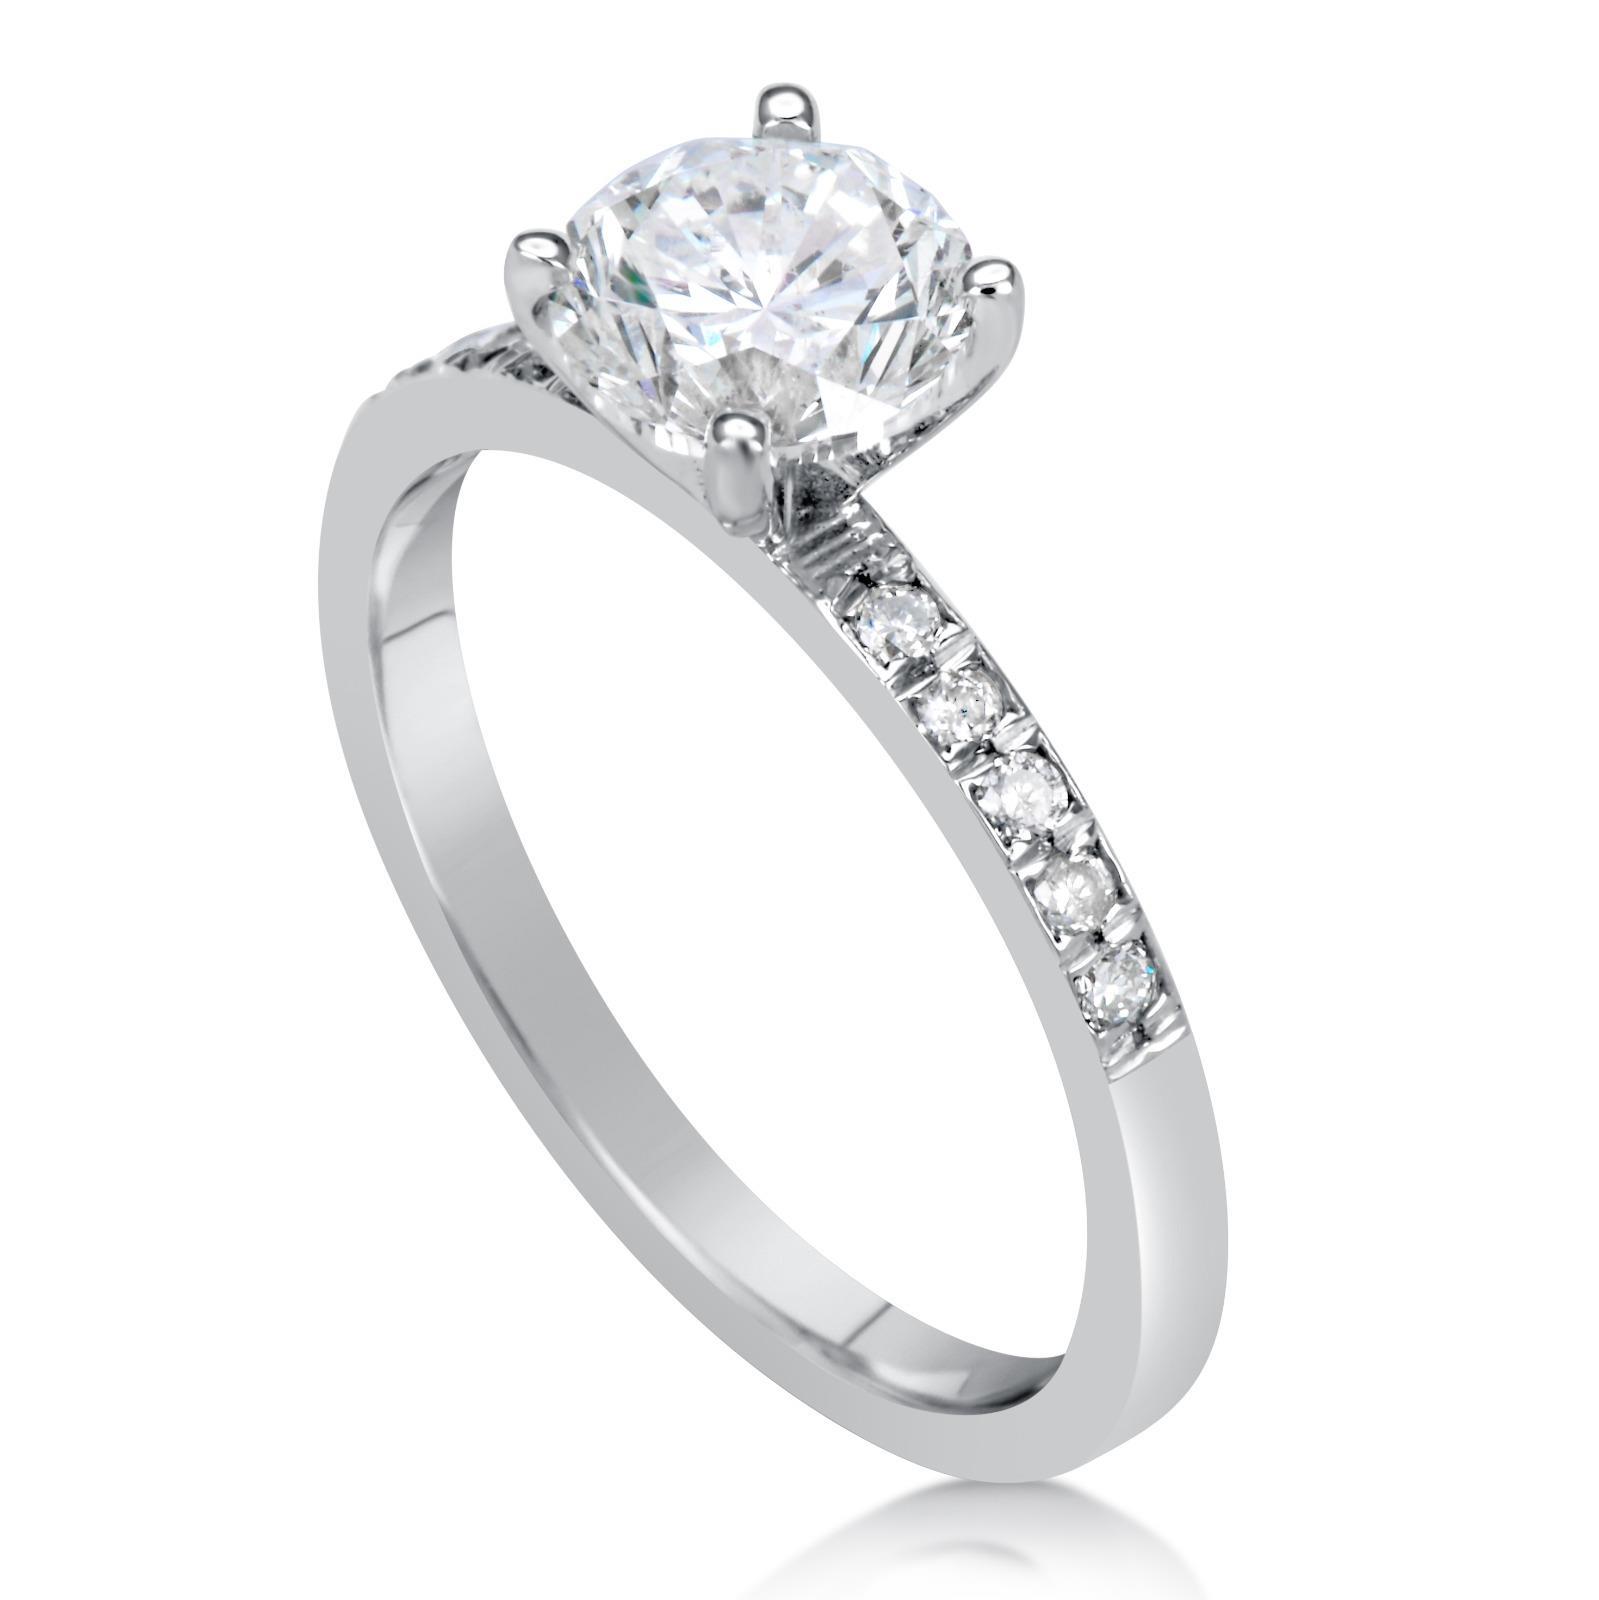 1.50 CT ROUND CUT D/SI1 DIAMOND SOLITAIRE ENGAGEMENT RING